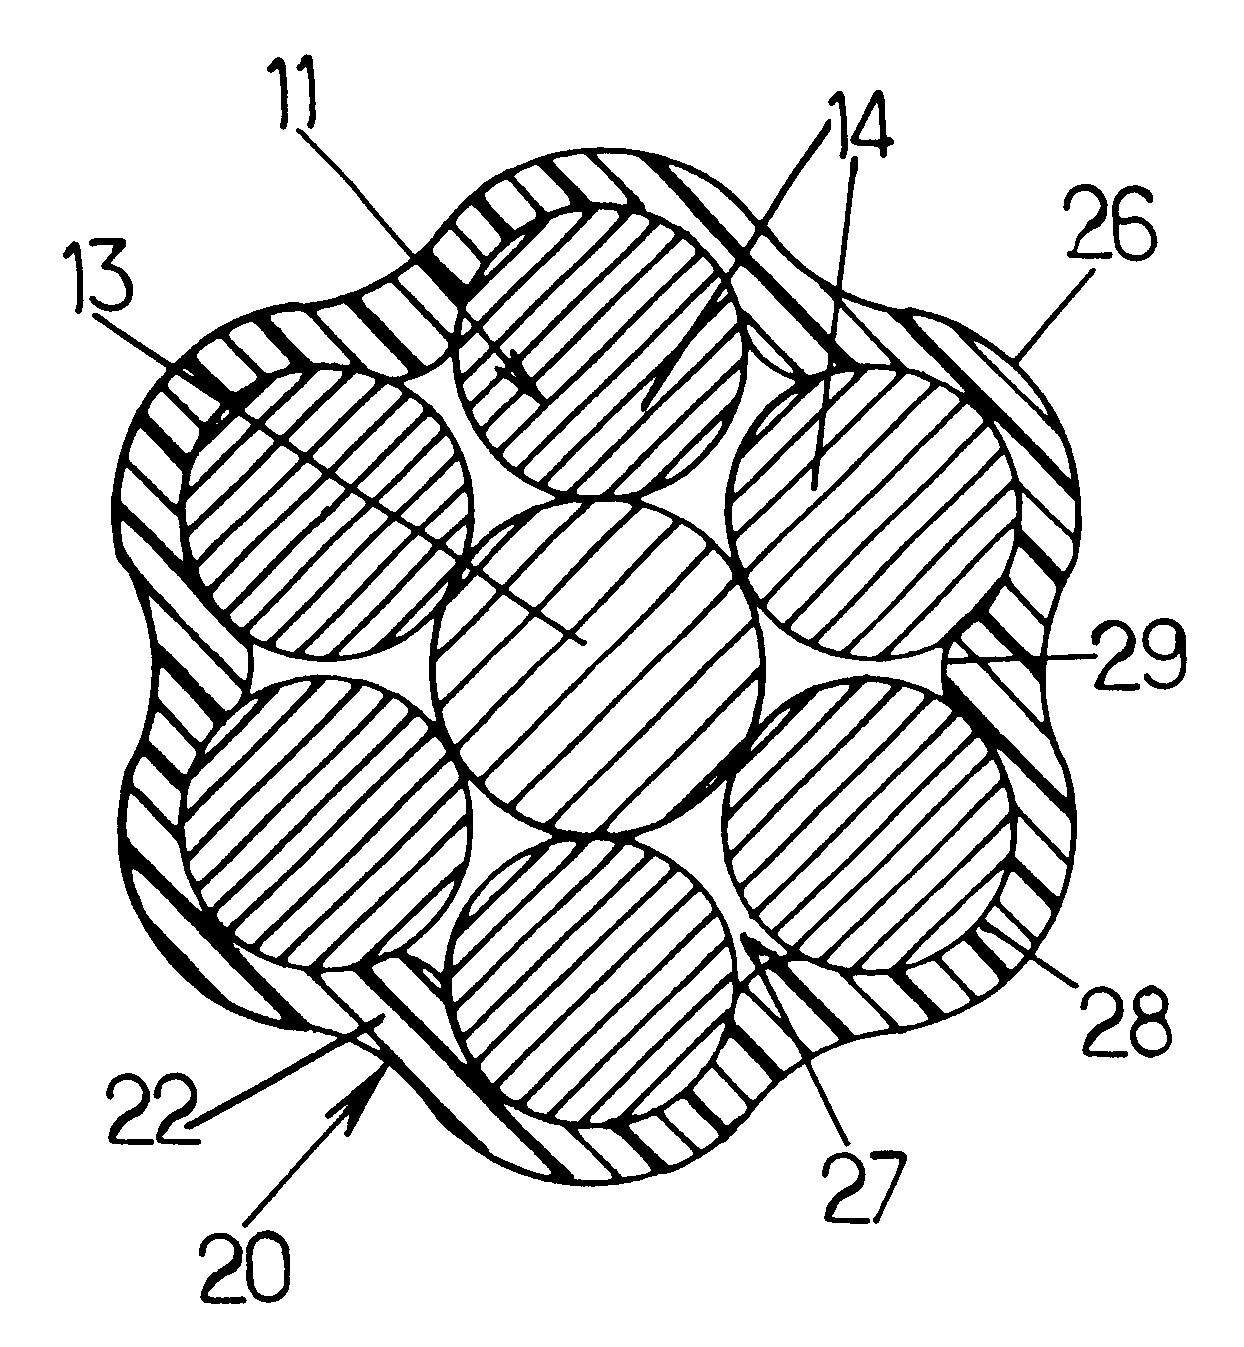 Cable with parallel wires for building work structure, anchoring for said cable, and anchoring method